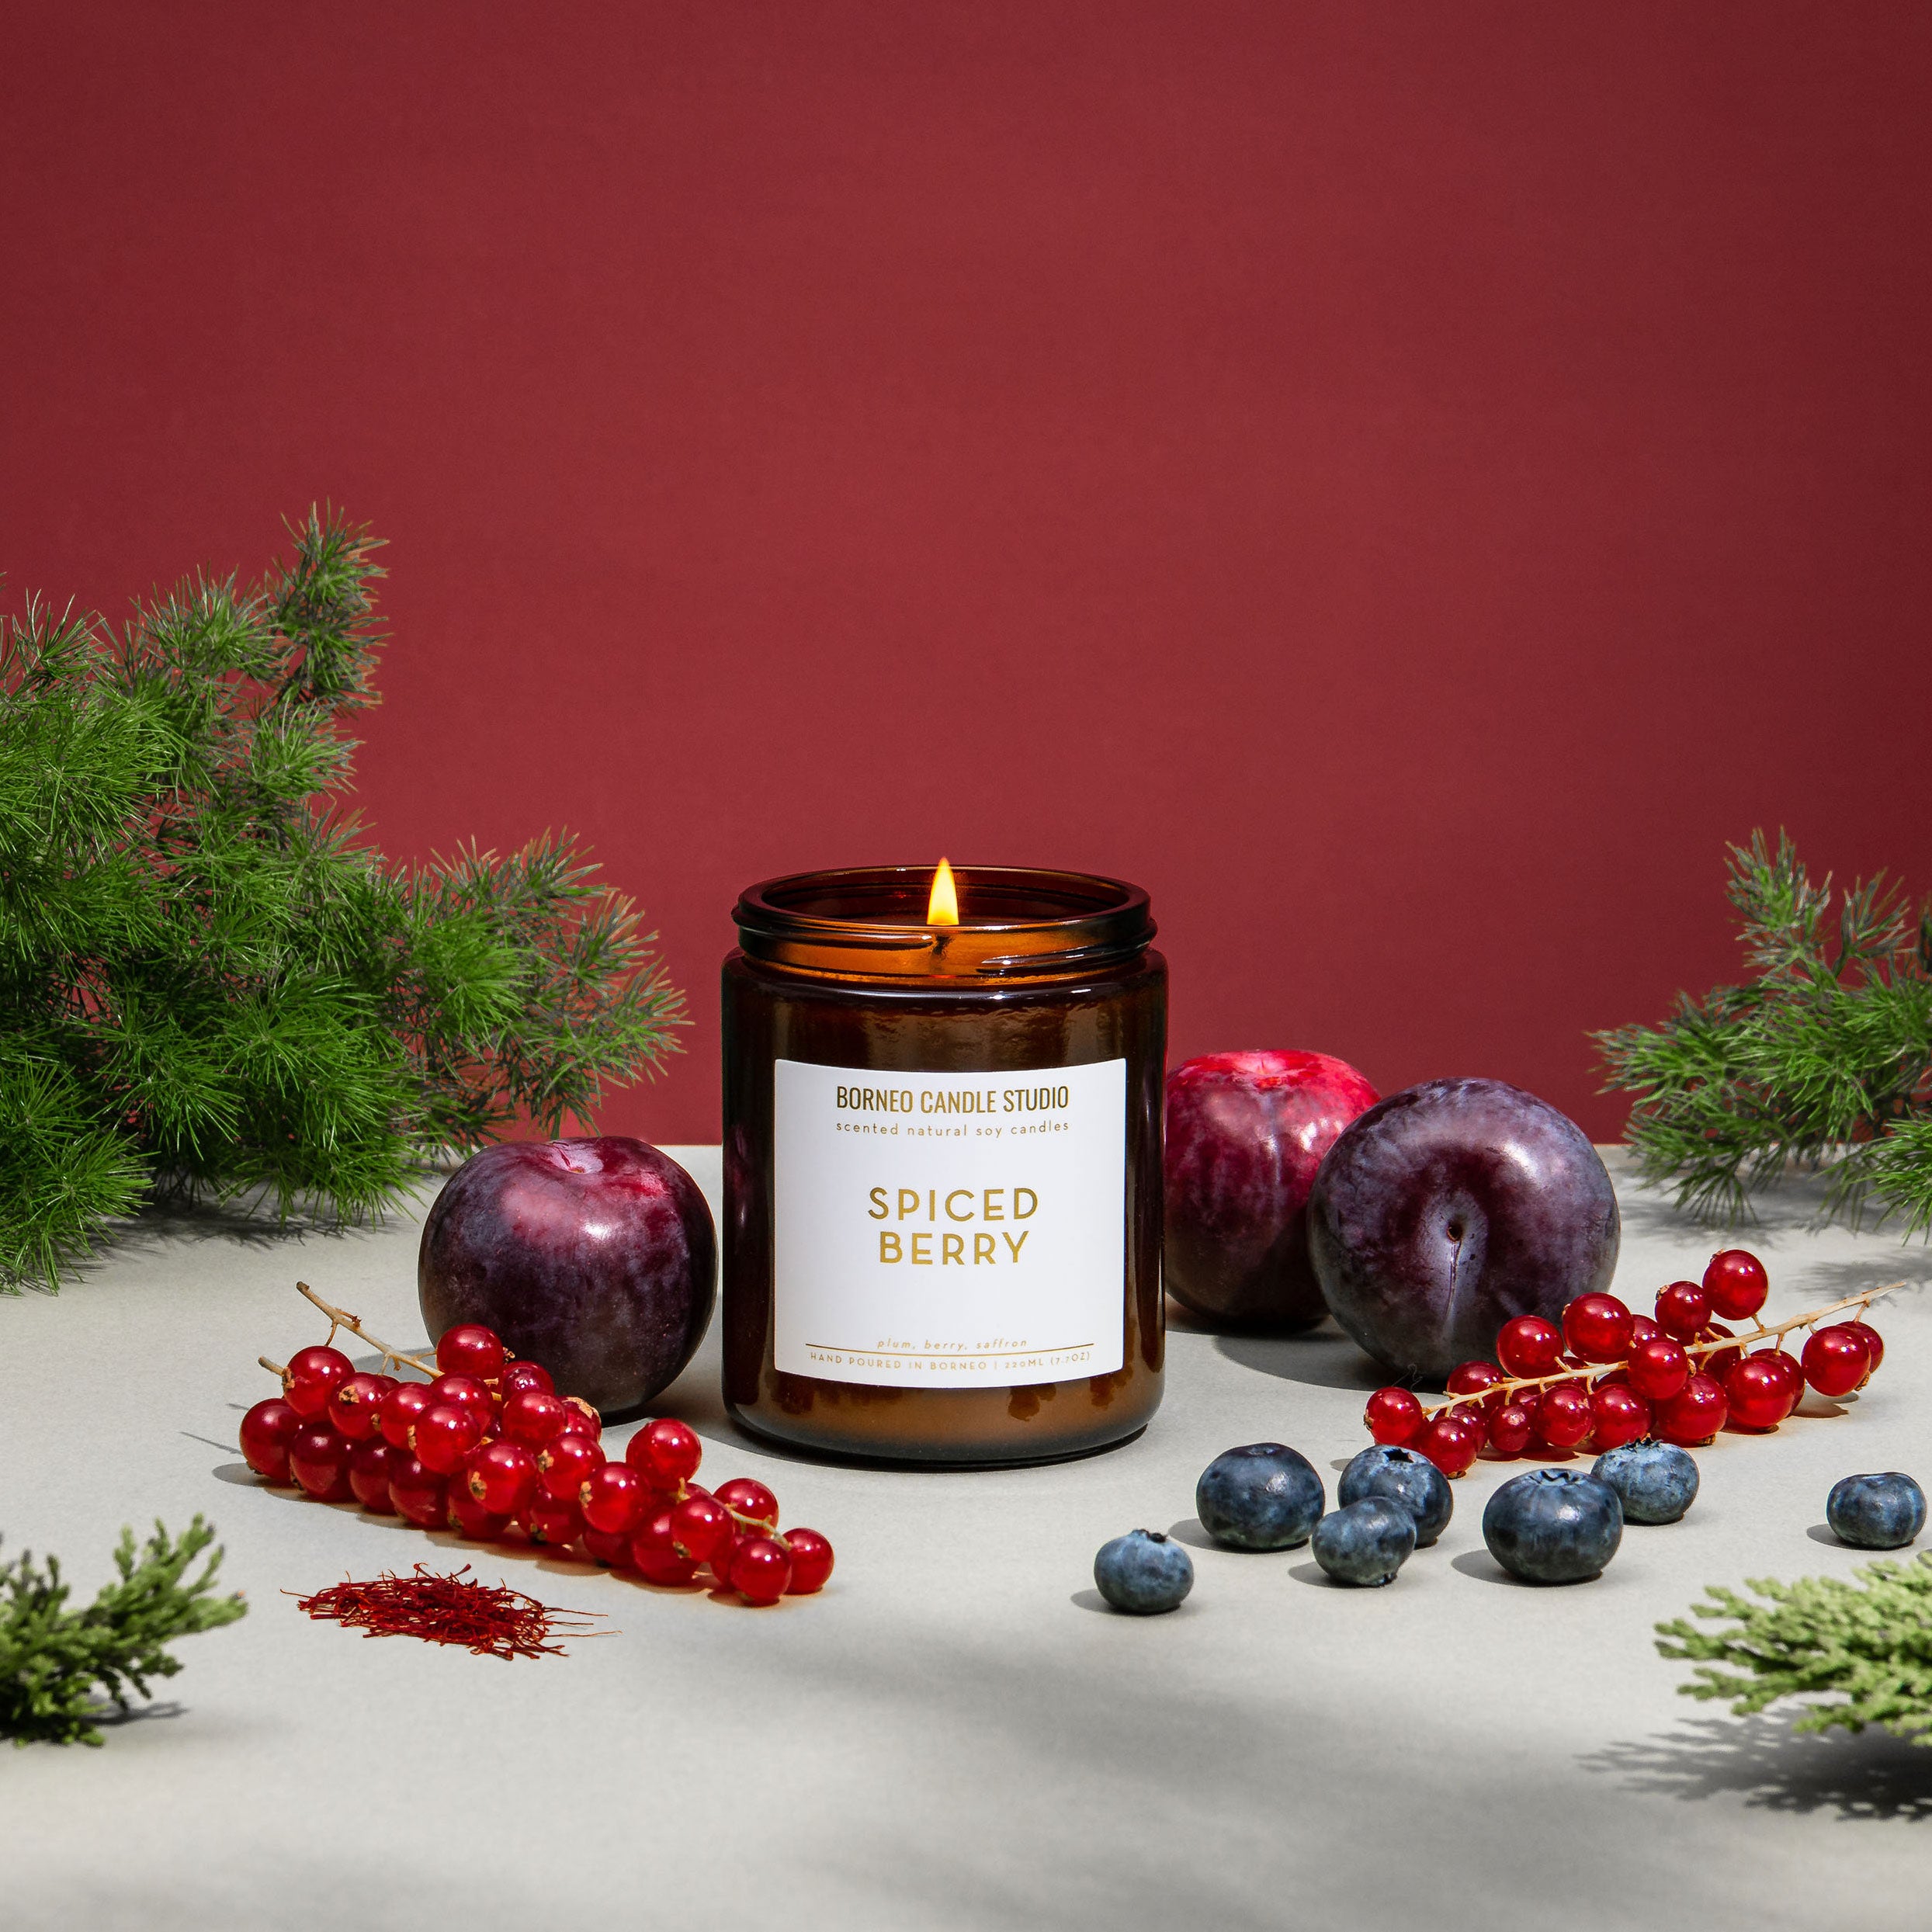 Spiced Berry Scented Candle by Borneo Candle Studio Christmas Soy Candle Collection 2022